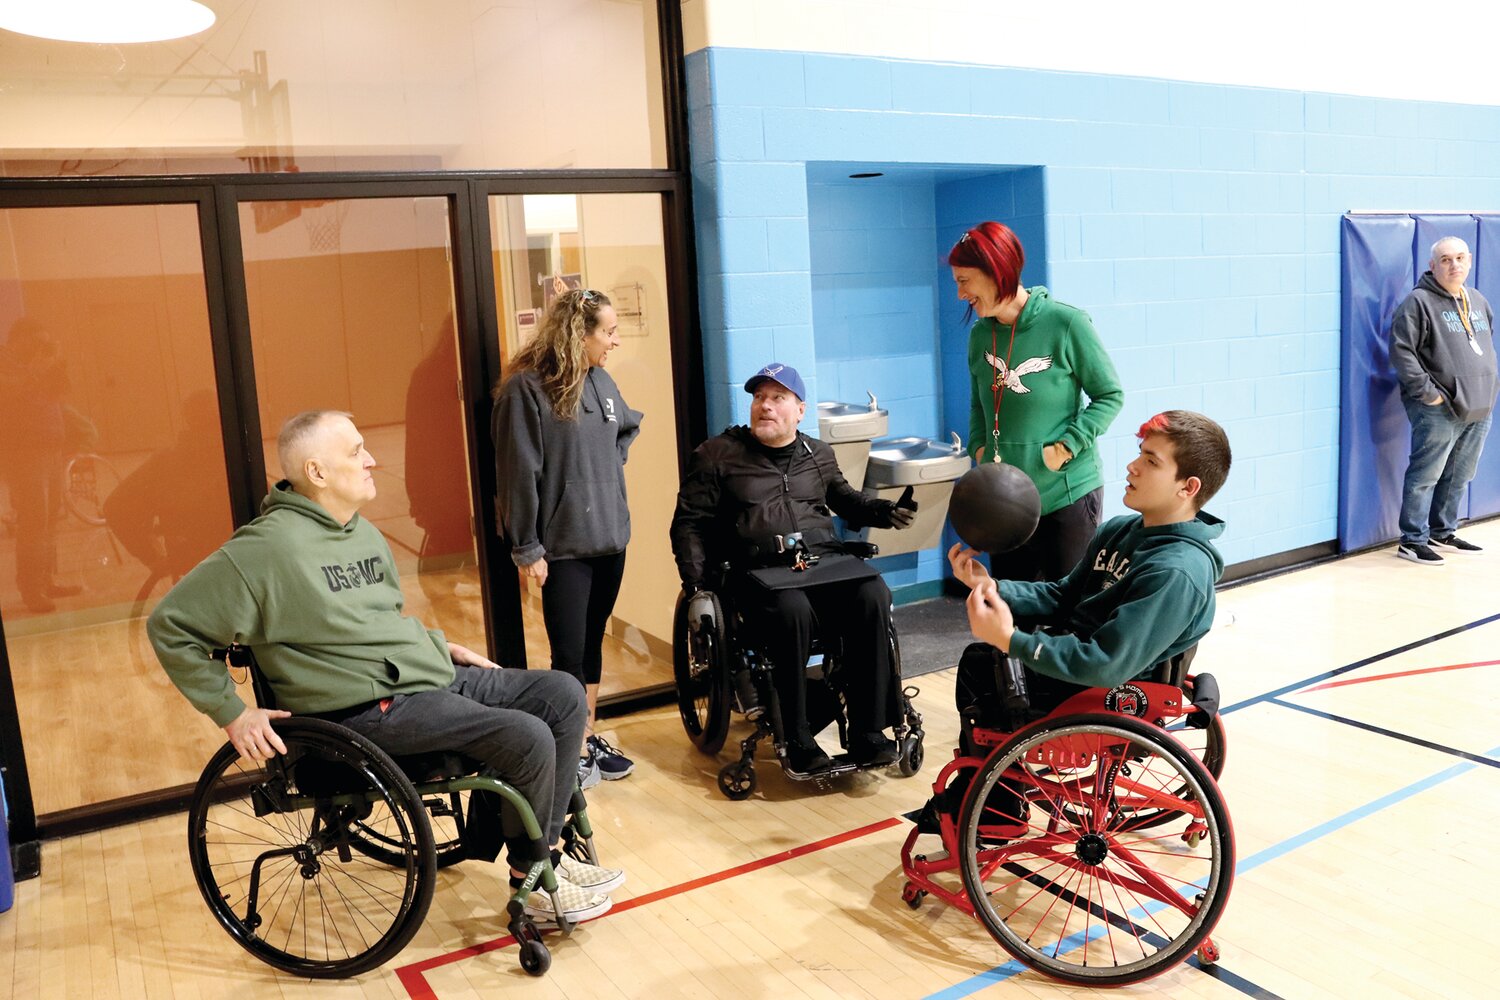 Veterans Pathway Program participants prepare for wheelchair basketball in Doylestown at the YMCA of Bucks and Montgomery Counties.